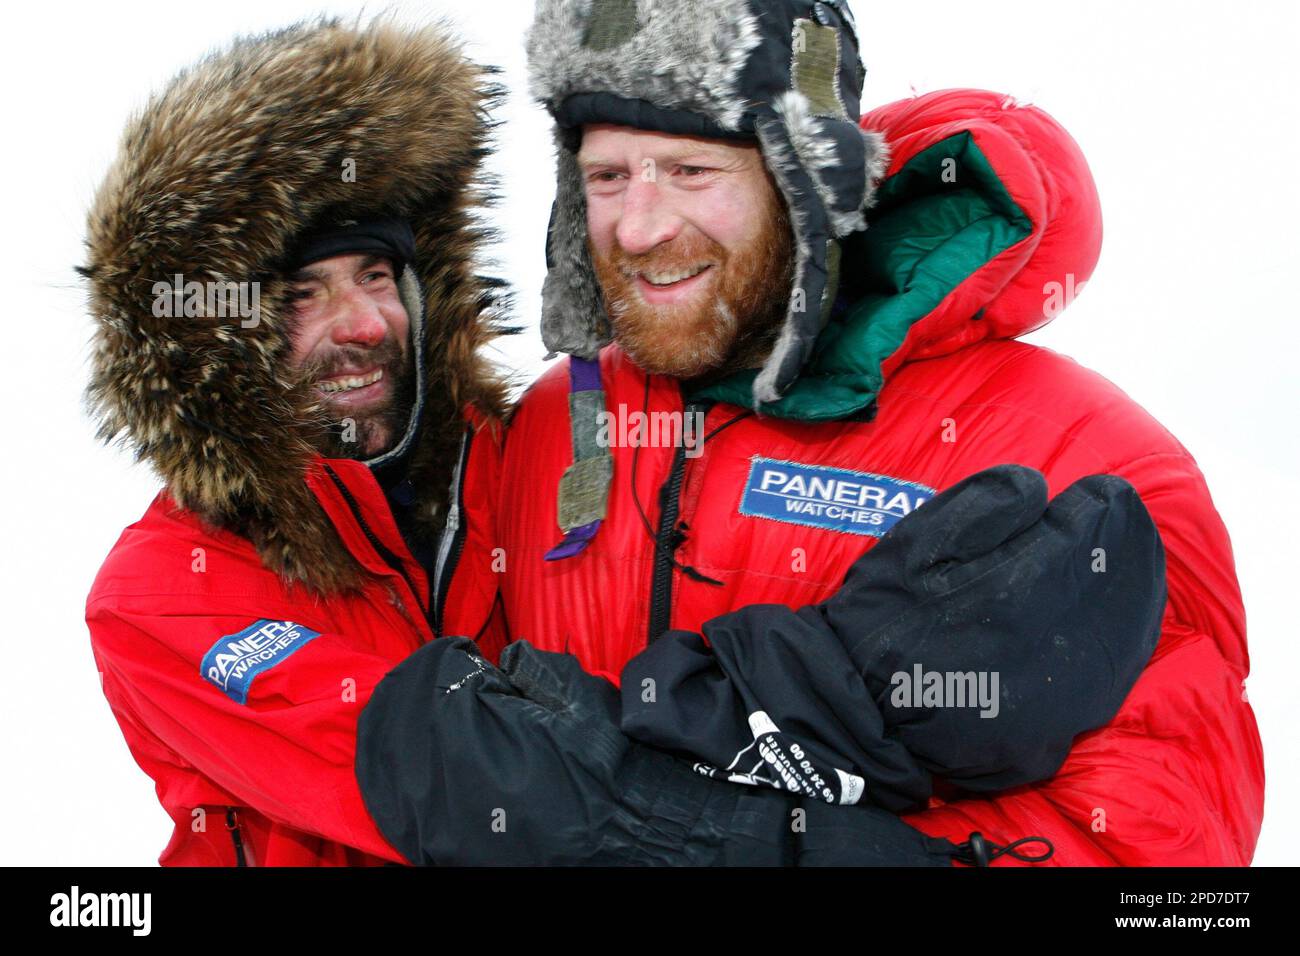 South African adventurer Mike Horn, left, who lives in Switzerland and  Norwegian explorer Borge Ousland, right, celebrate the end of their  expedition "North Pole Winter Expedition" at the Barneo ice camp 50